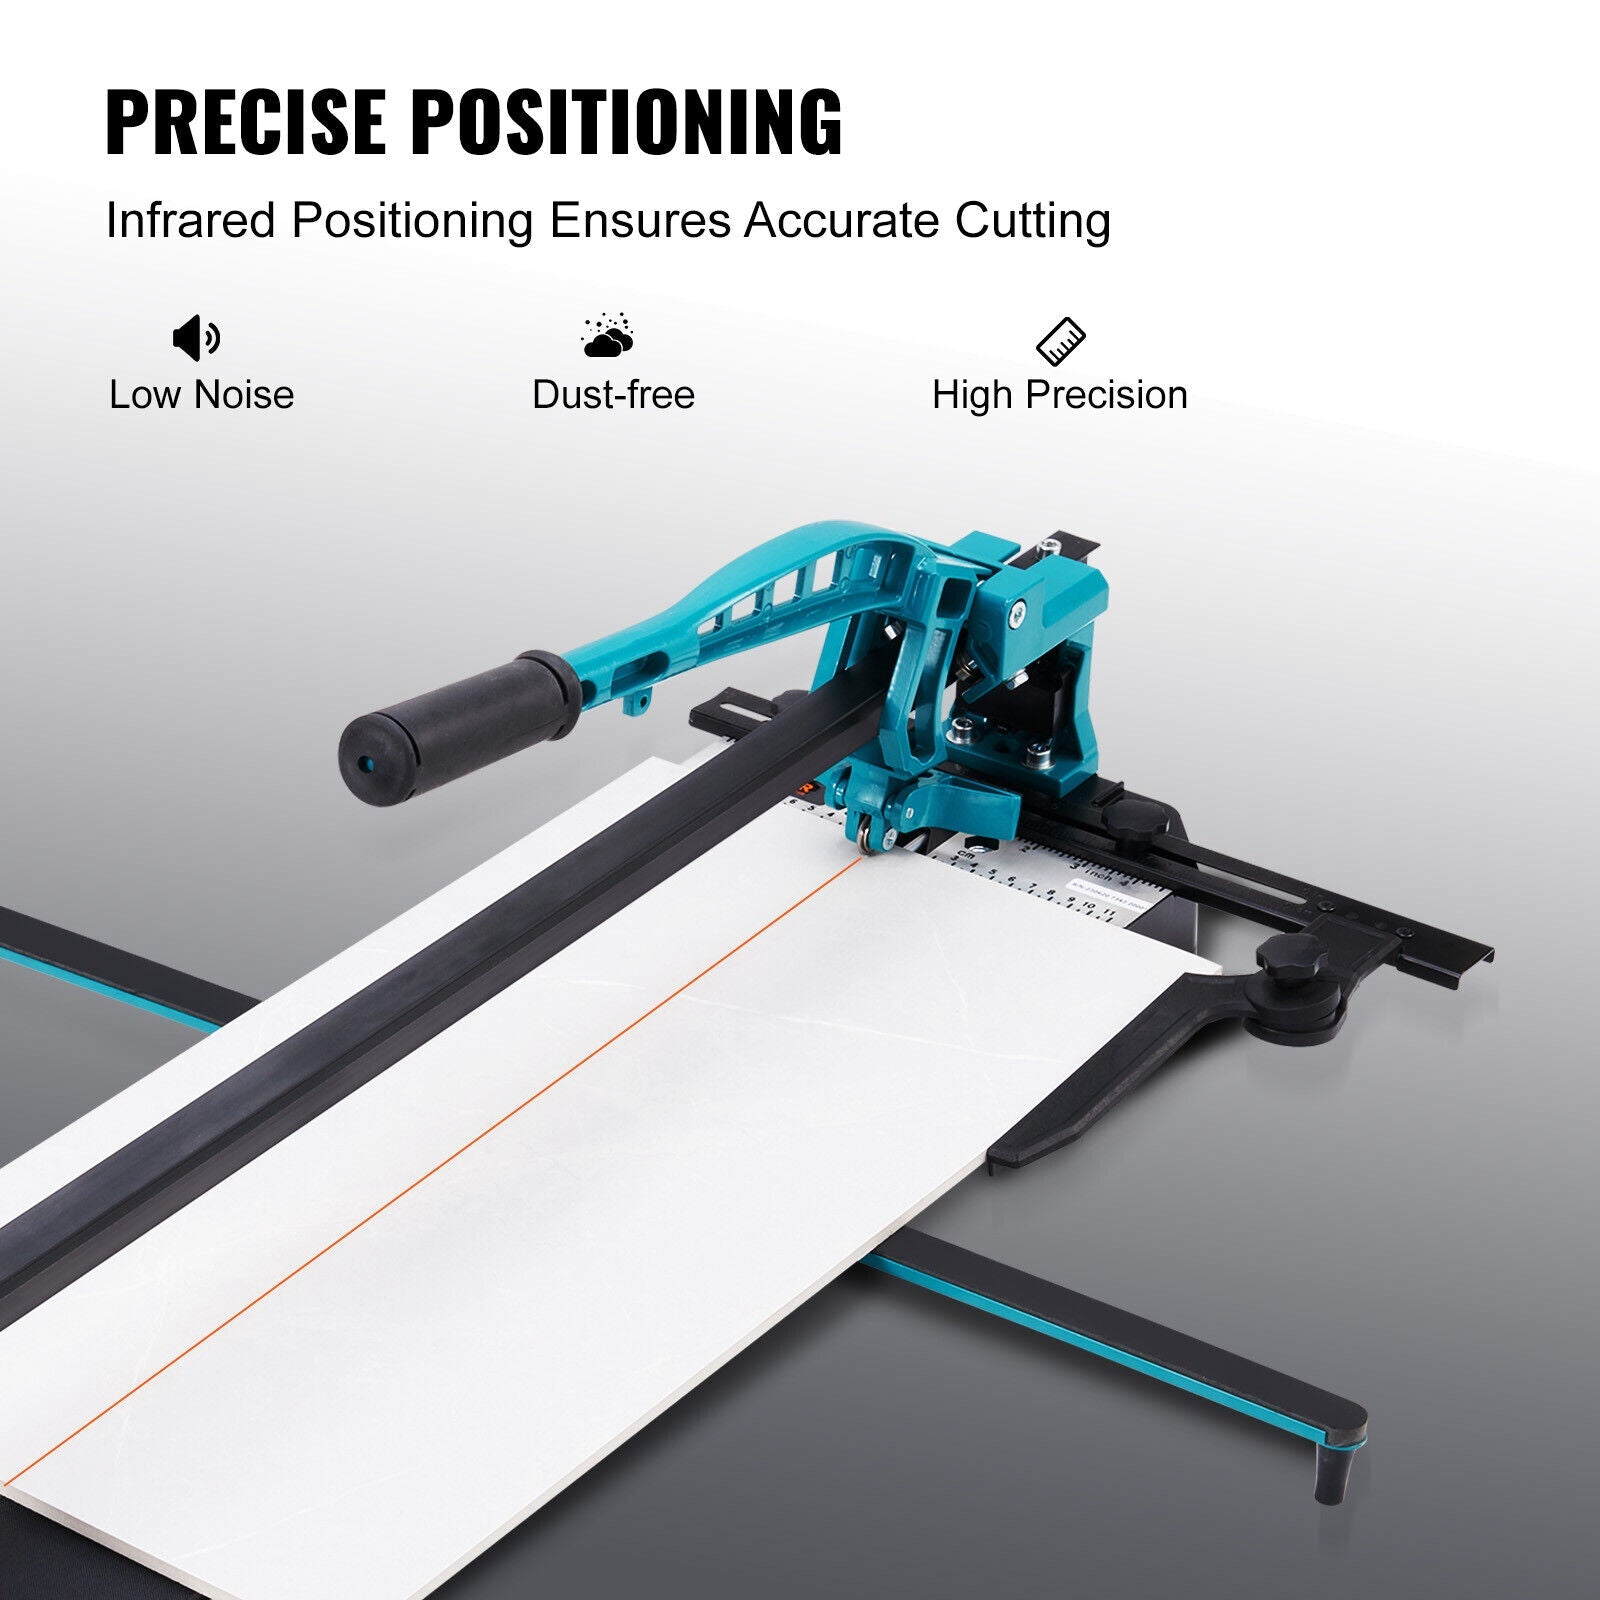 PREMIUM 1200mm Manual Tile Cutter Cutting Machine With Infrared for Porcelain